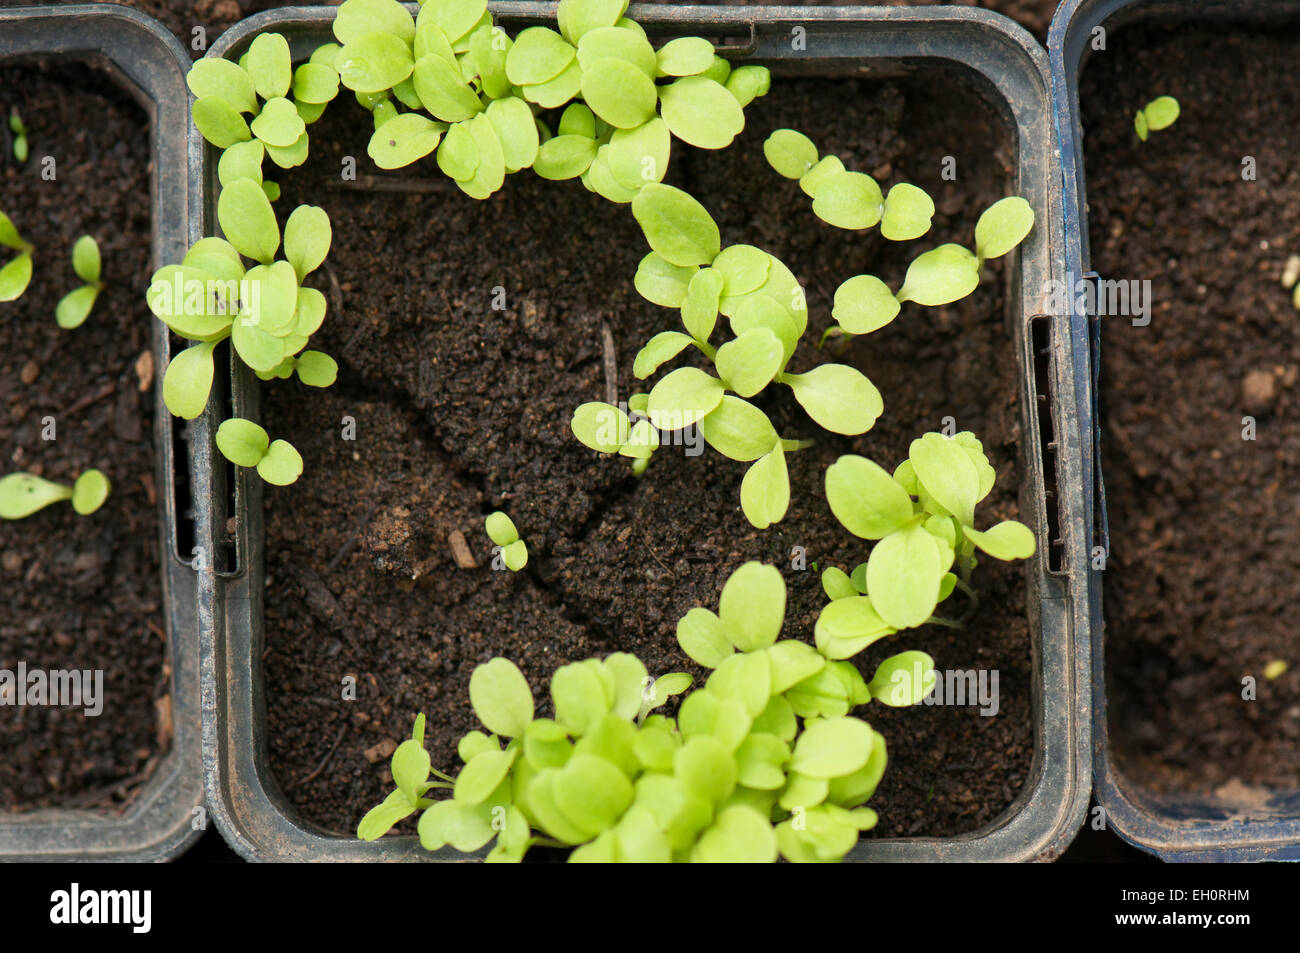 Young salat plants(Lactuca sativa) in pots Stock Photo